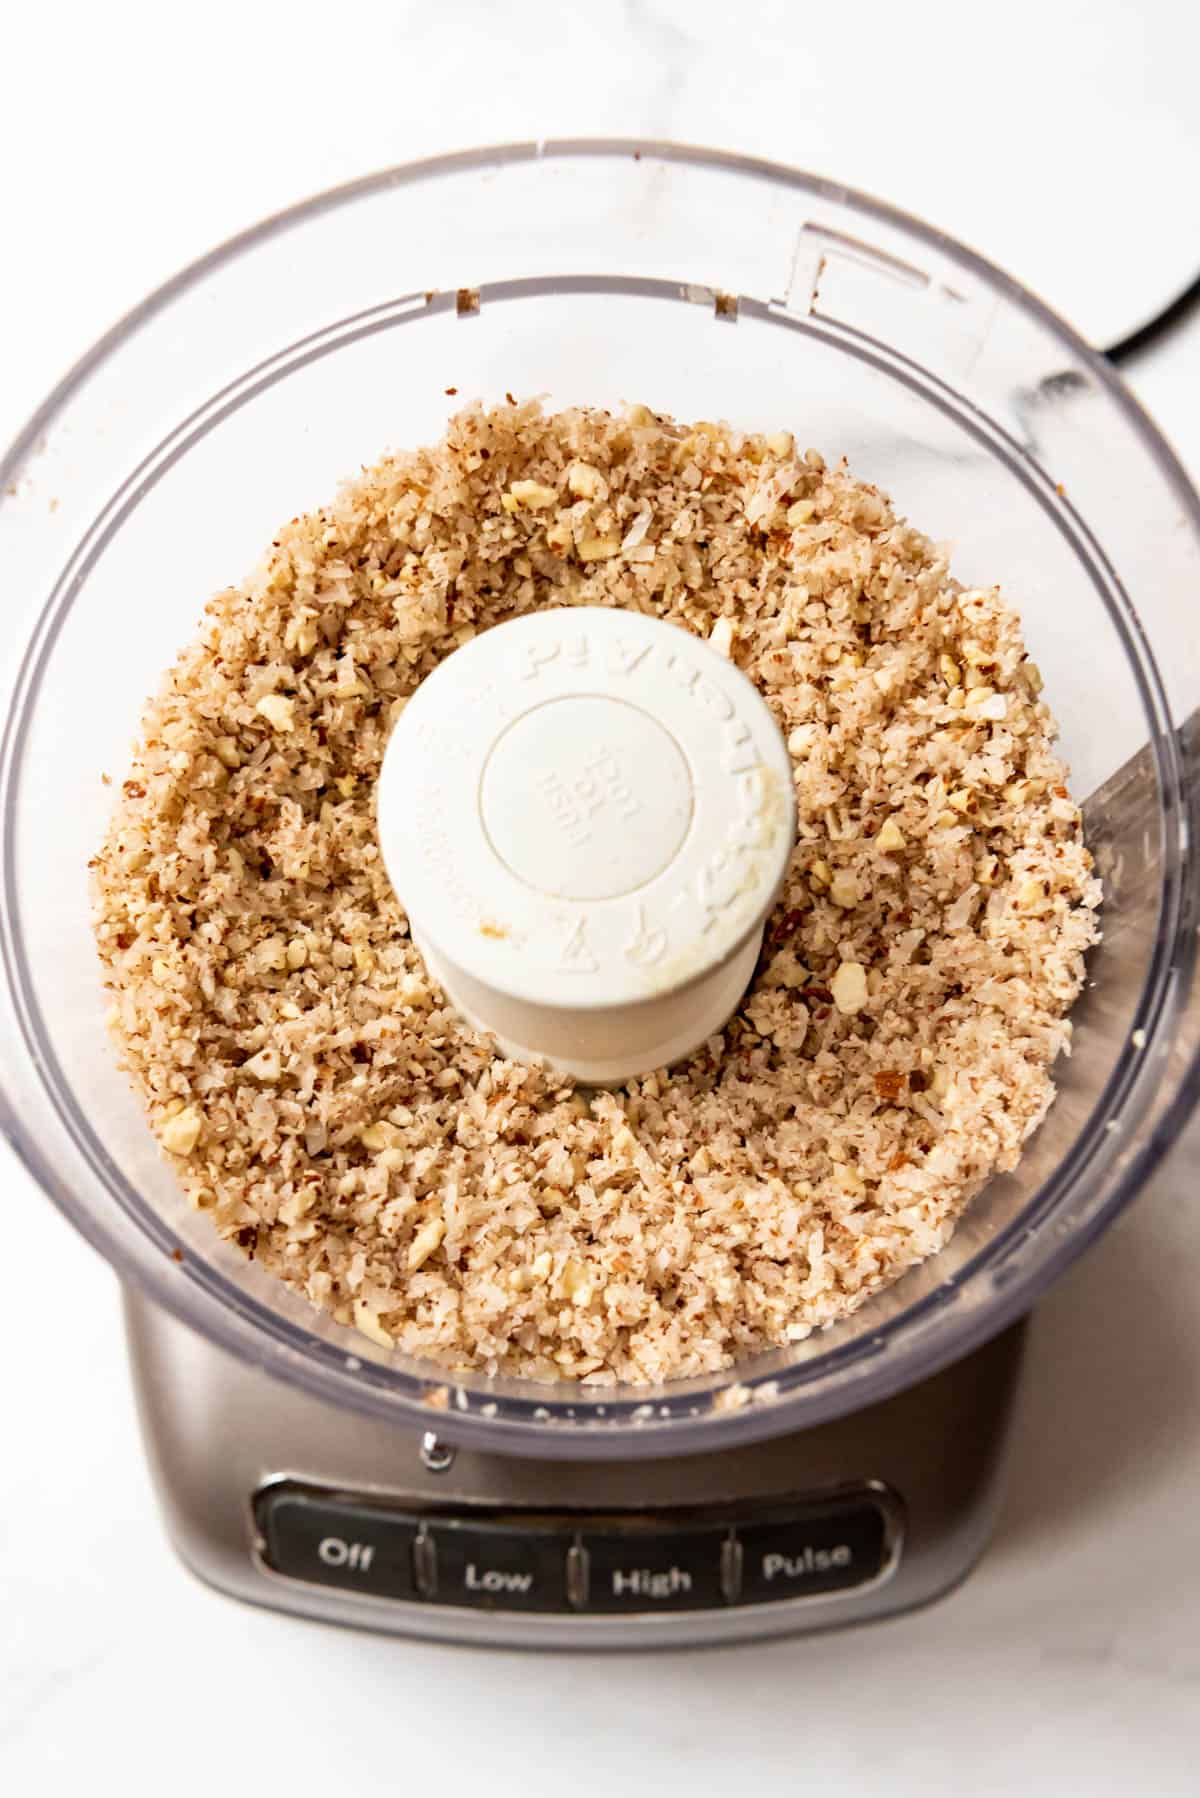 Finely chopped coconut and almonds in a food processor.